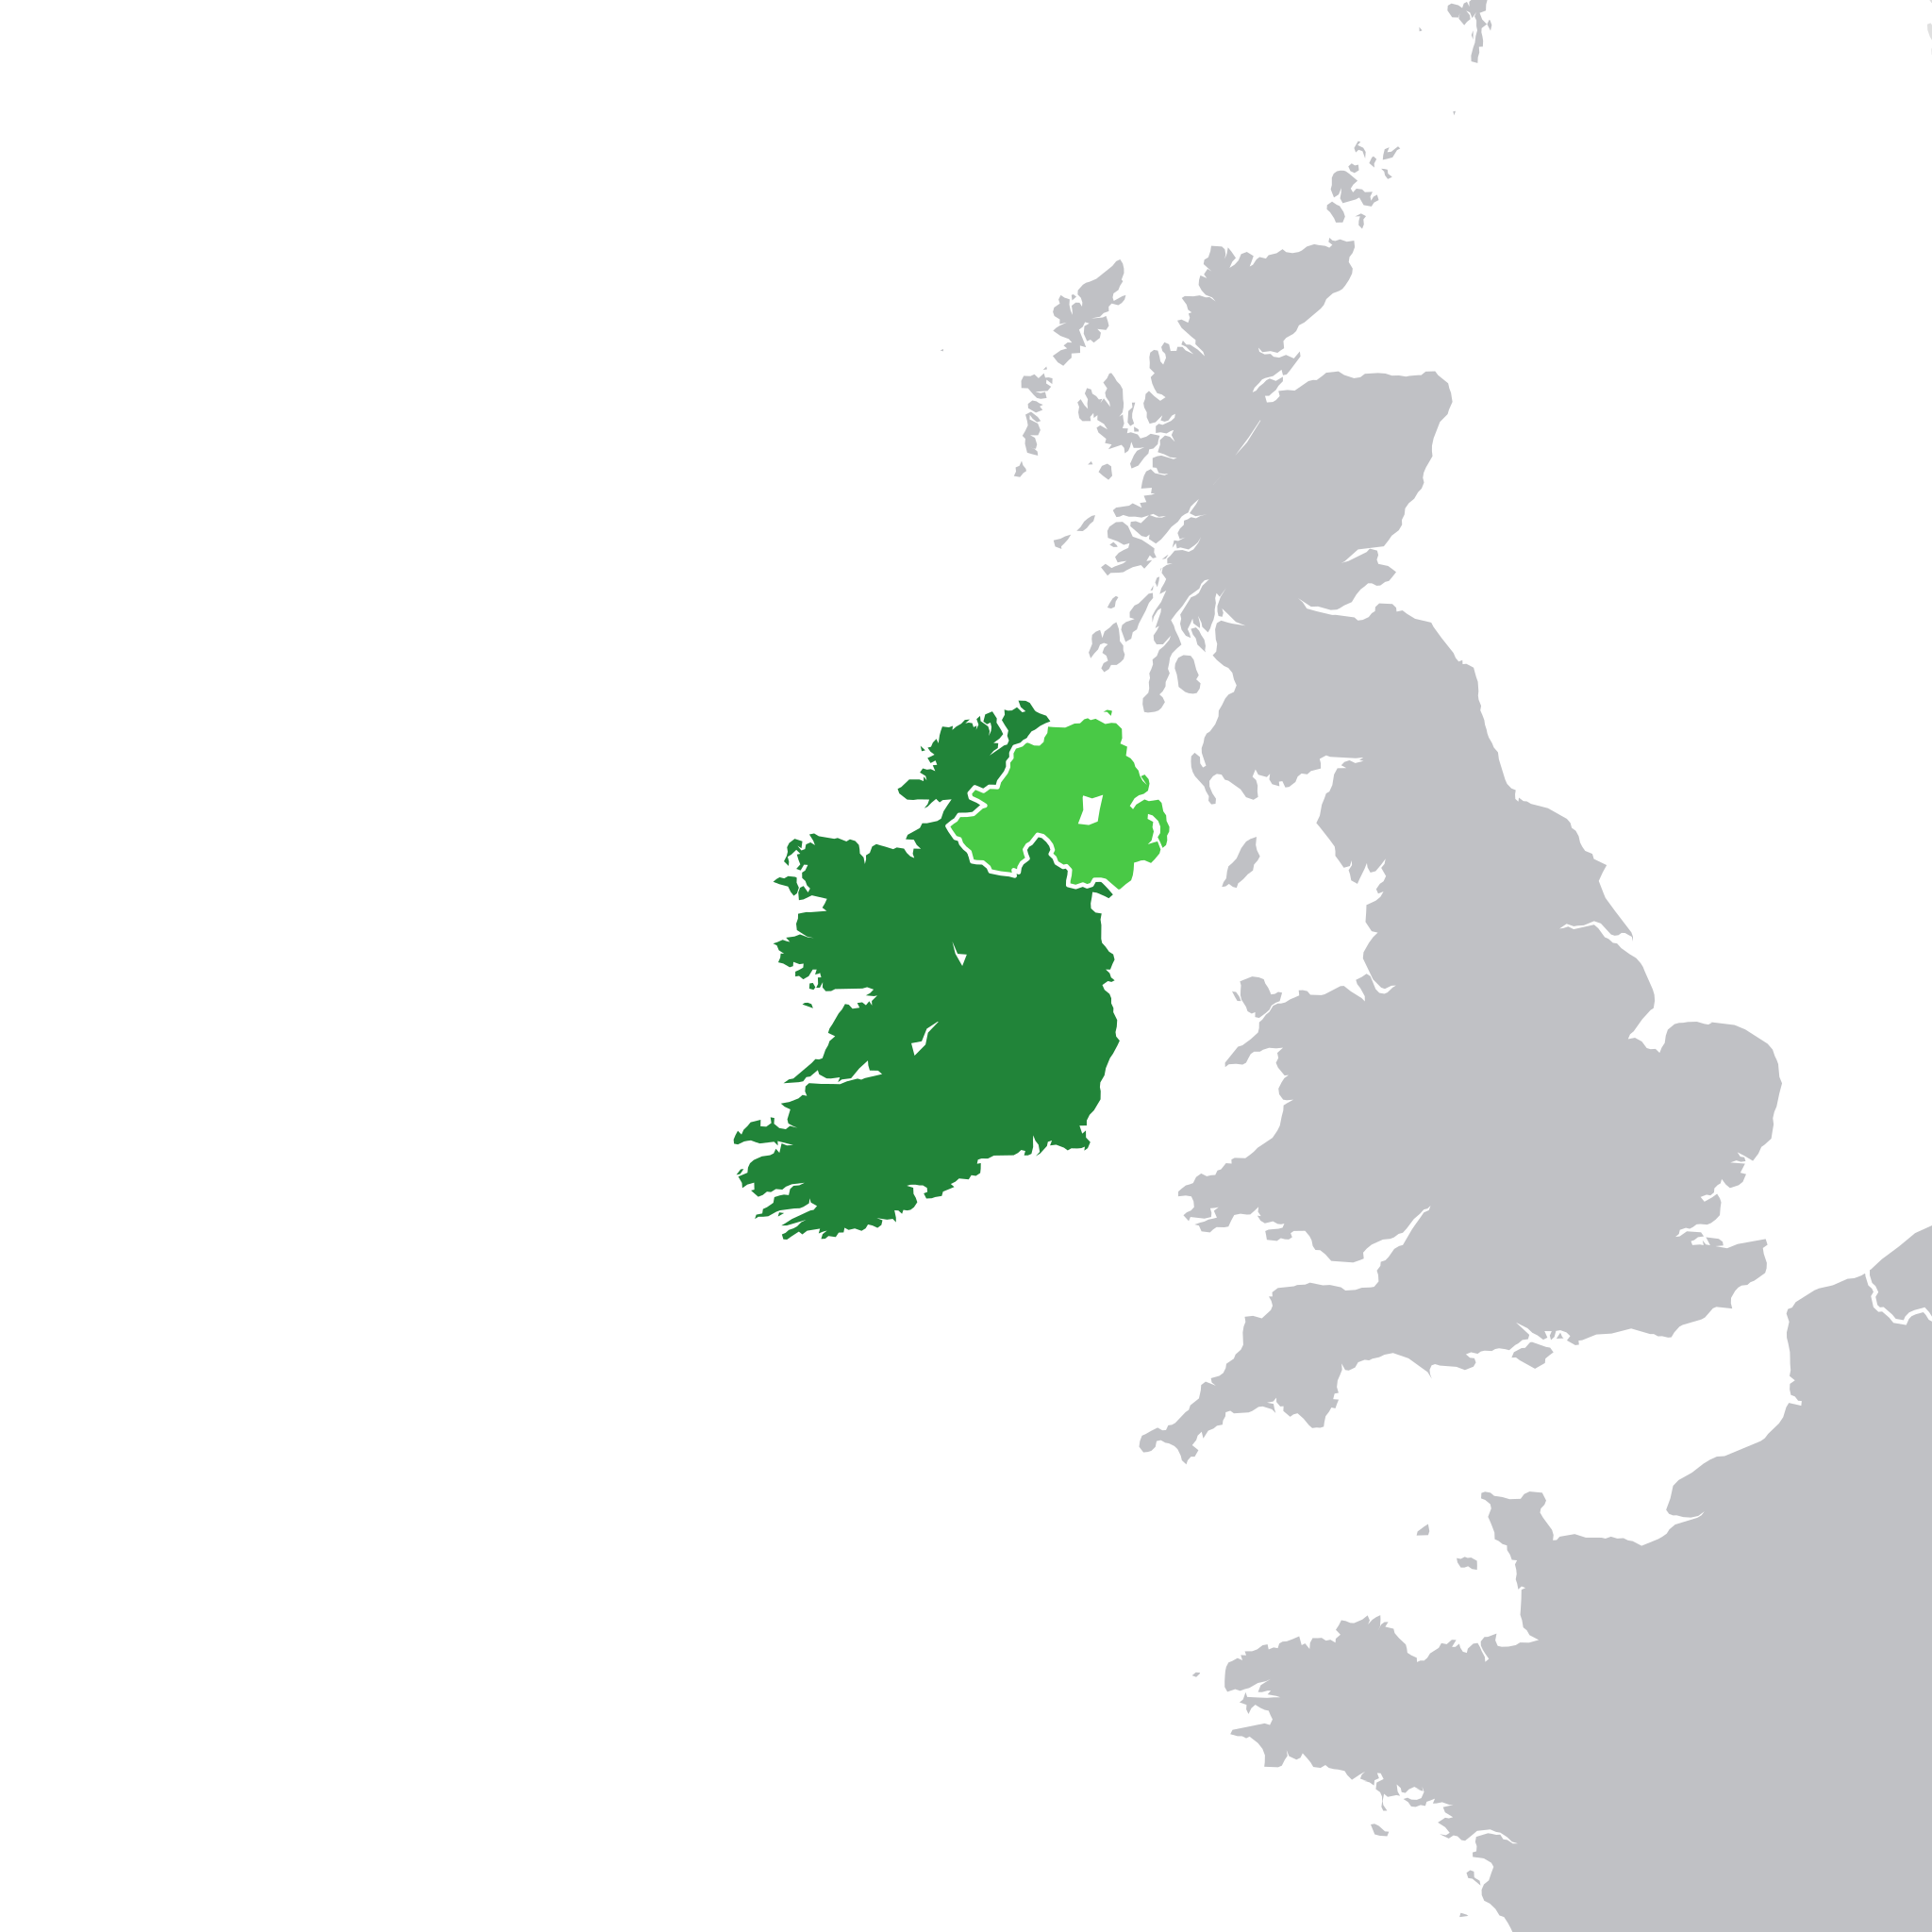 The light green area is under British occupation.